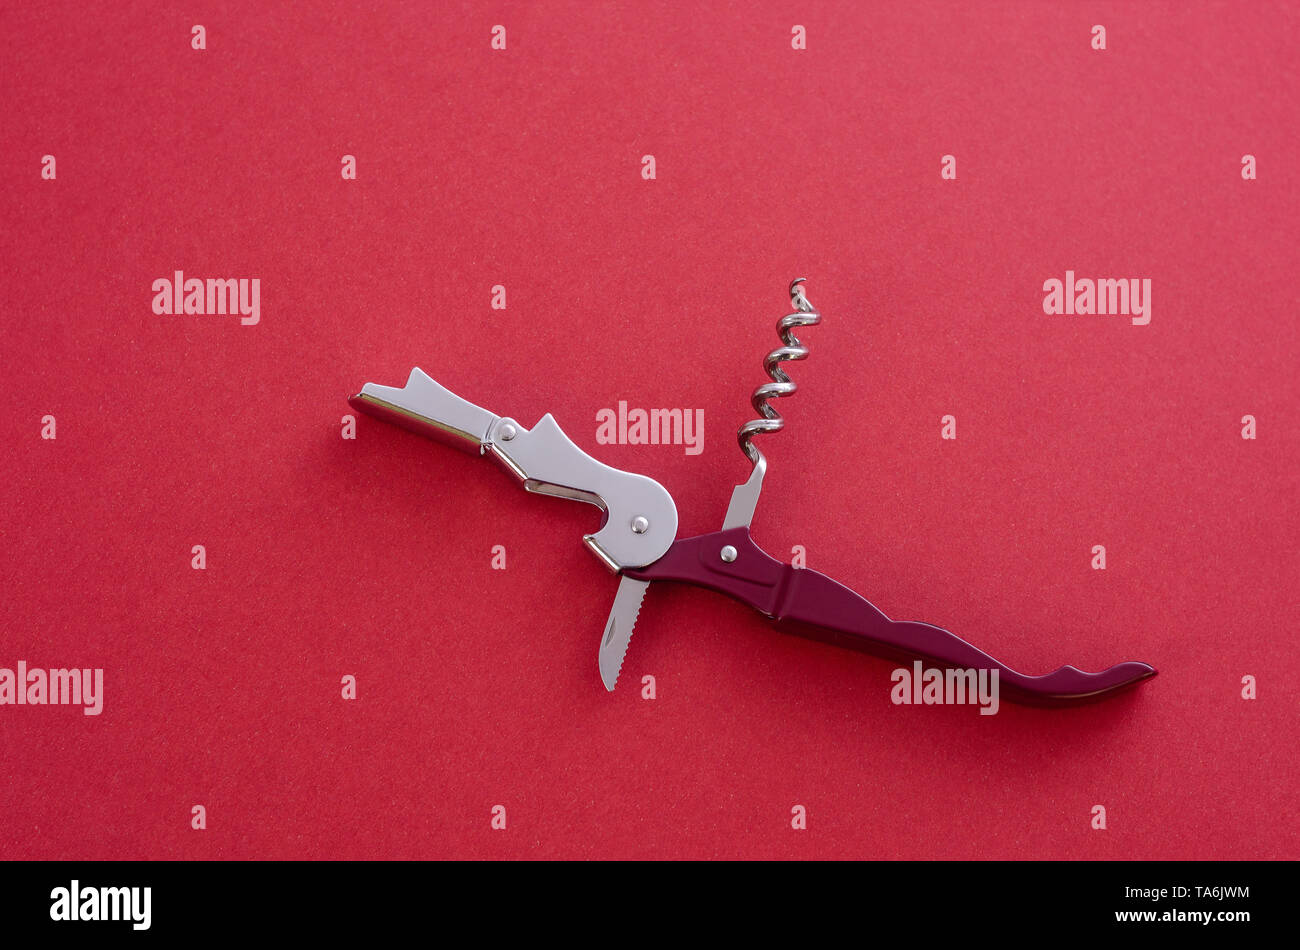 Opened sommelier's knife with corkscrew and bottle opener, waiter's knife professional, on red background. Stock Photo